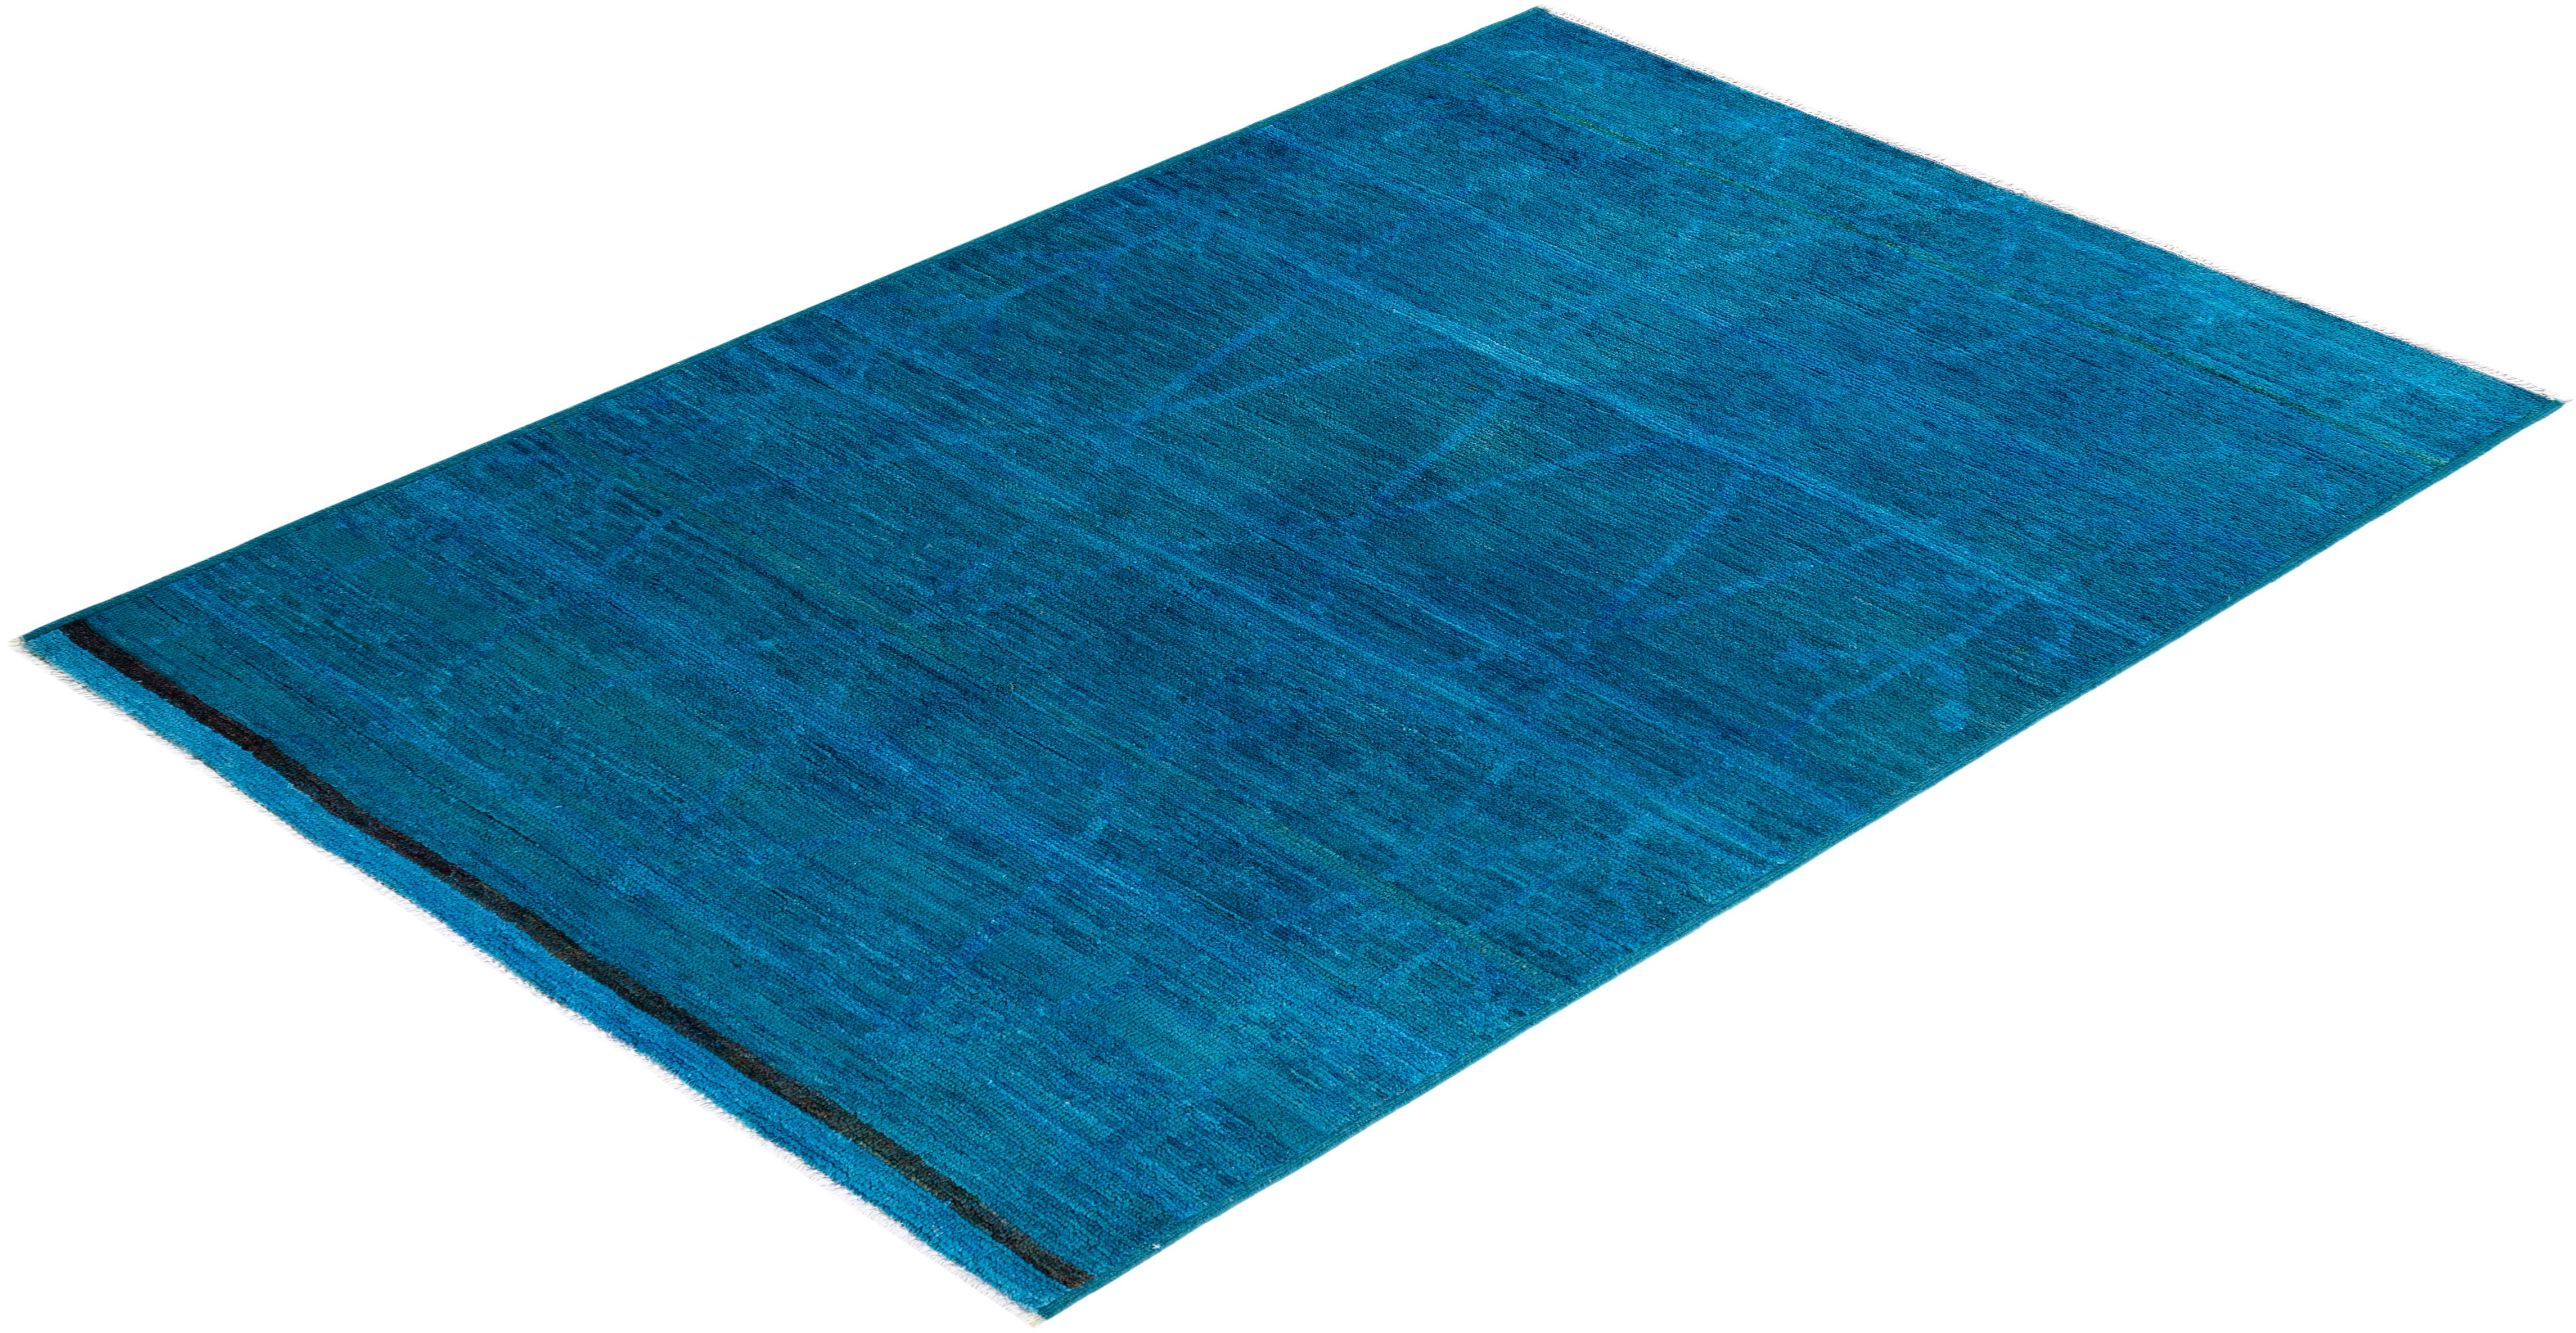 Contemporary Modern Handknotted Wool Blue Area Rug im Angebot 2